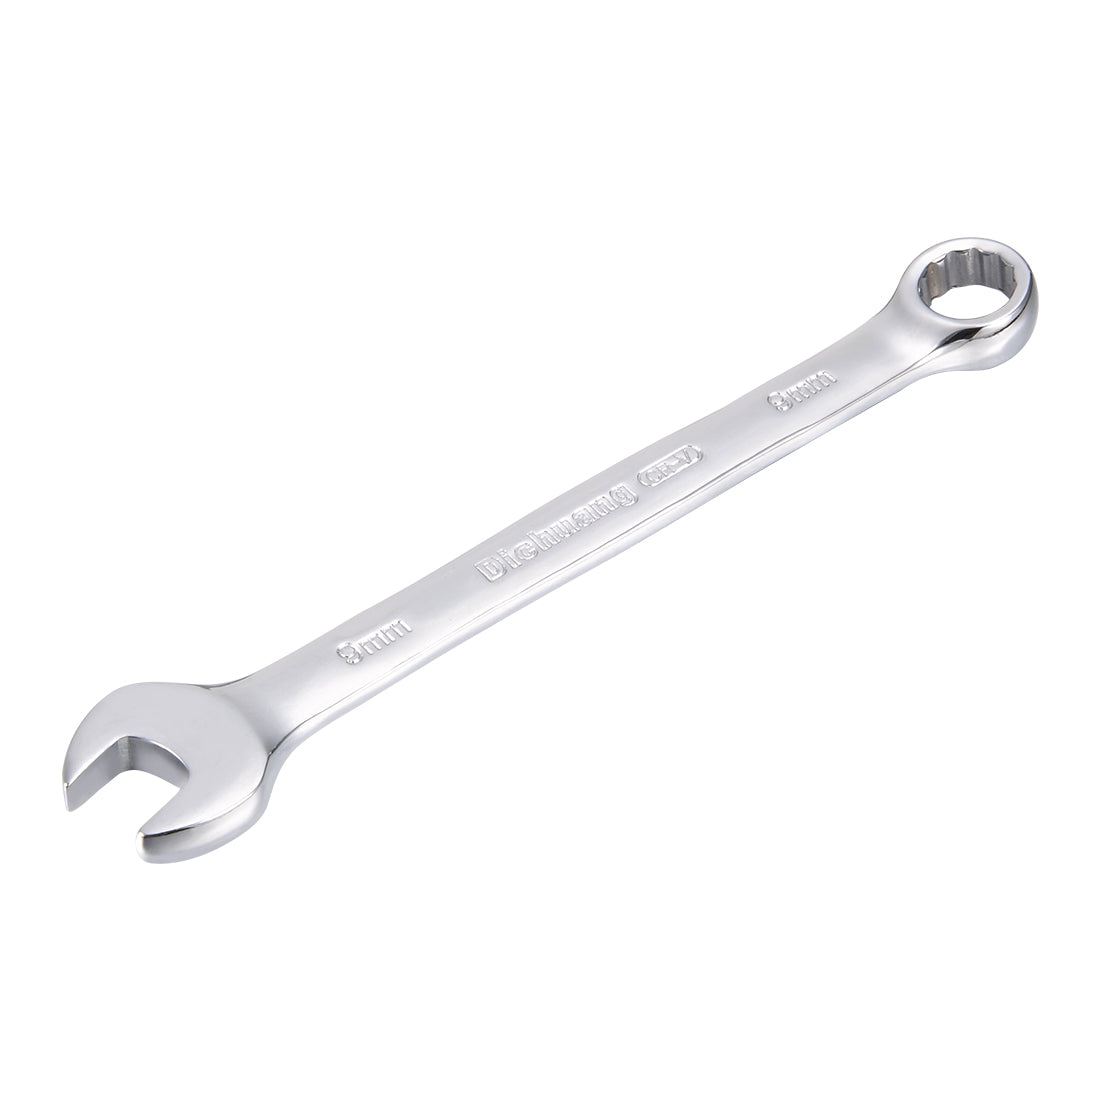 uxcell Uxcell Metric 9mm 12-Point Box Open End Combination Wrench Chrome Finish, Cr-V